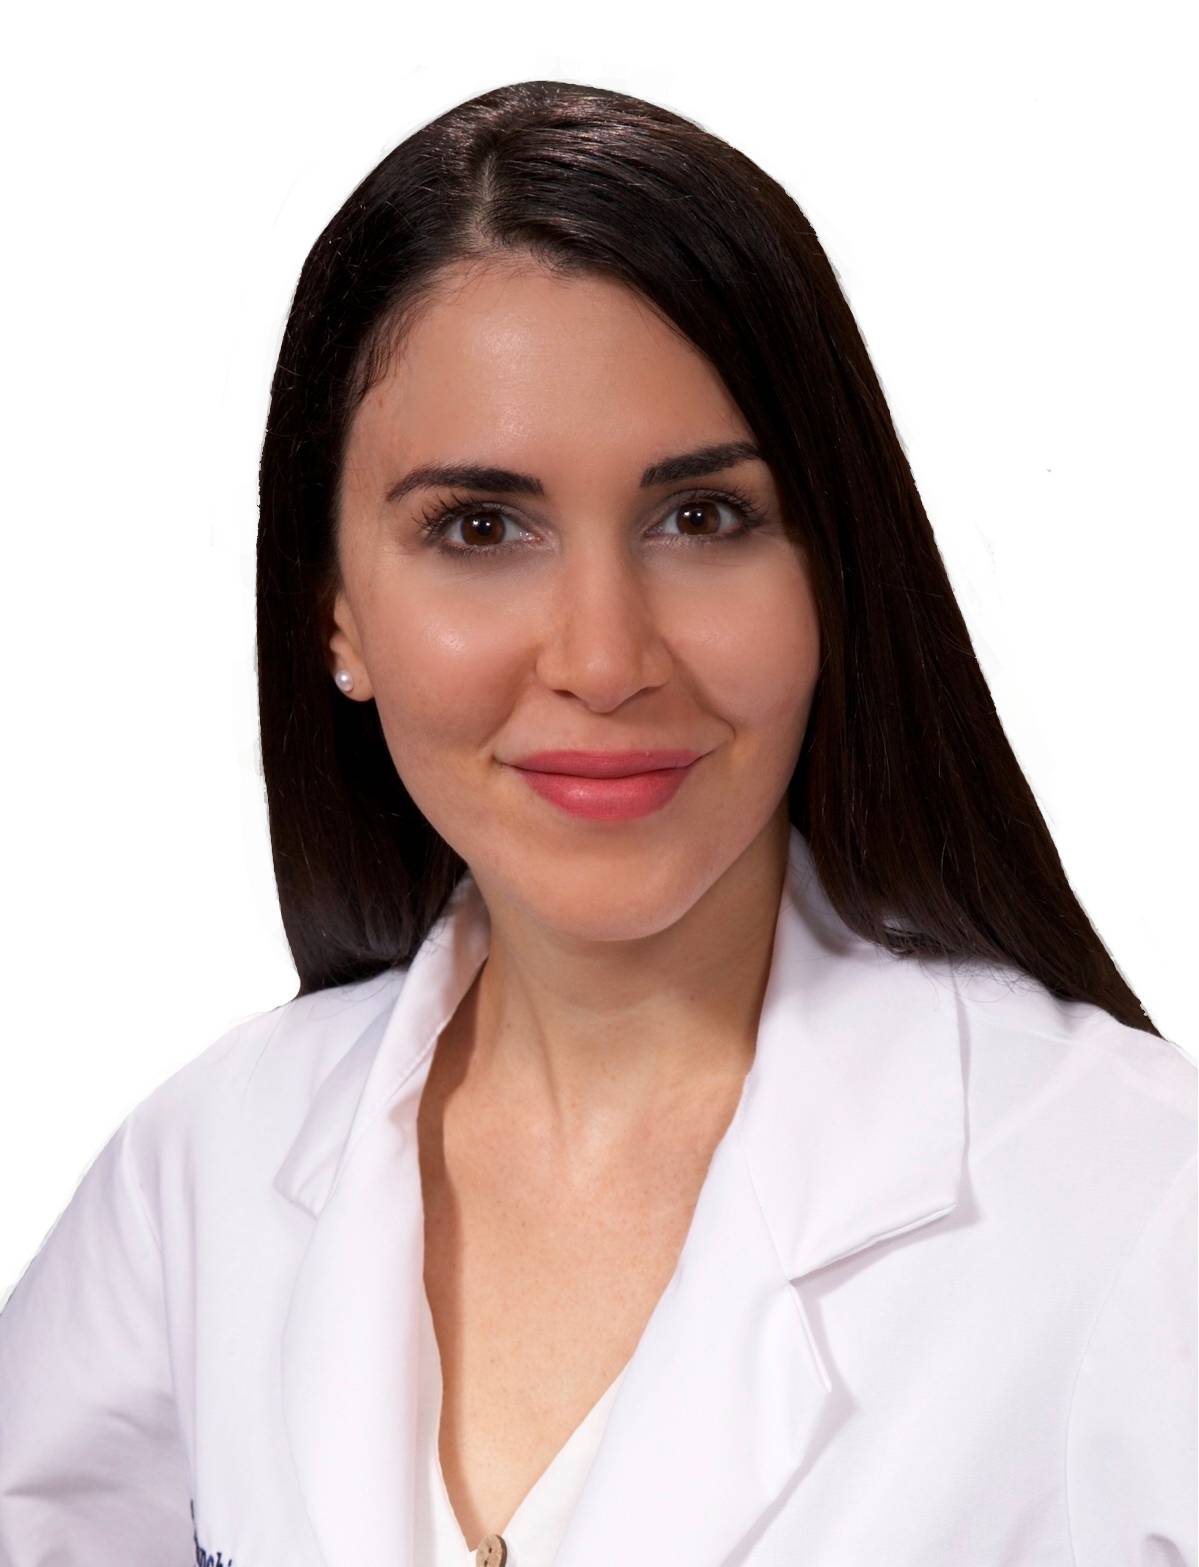 Leah Tehranchi, DO  is an Access Healthcare Family Medicine doctor. She is a Board Certified as a Family Medicine.